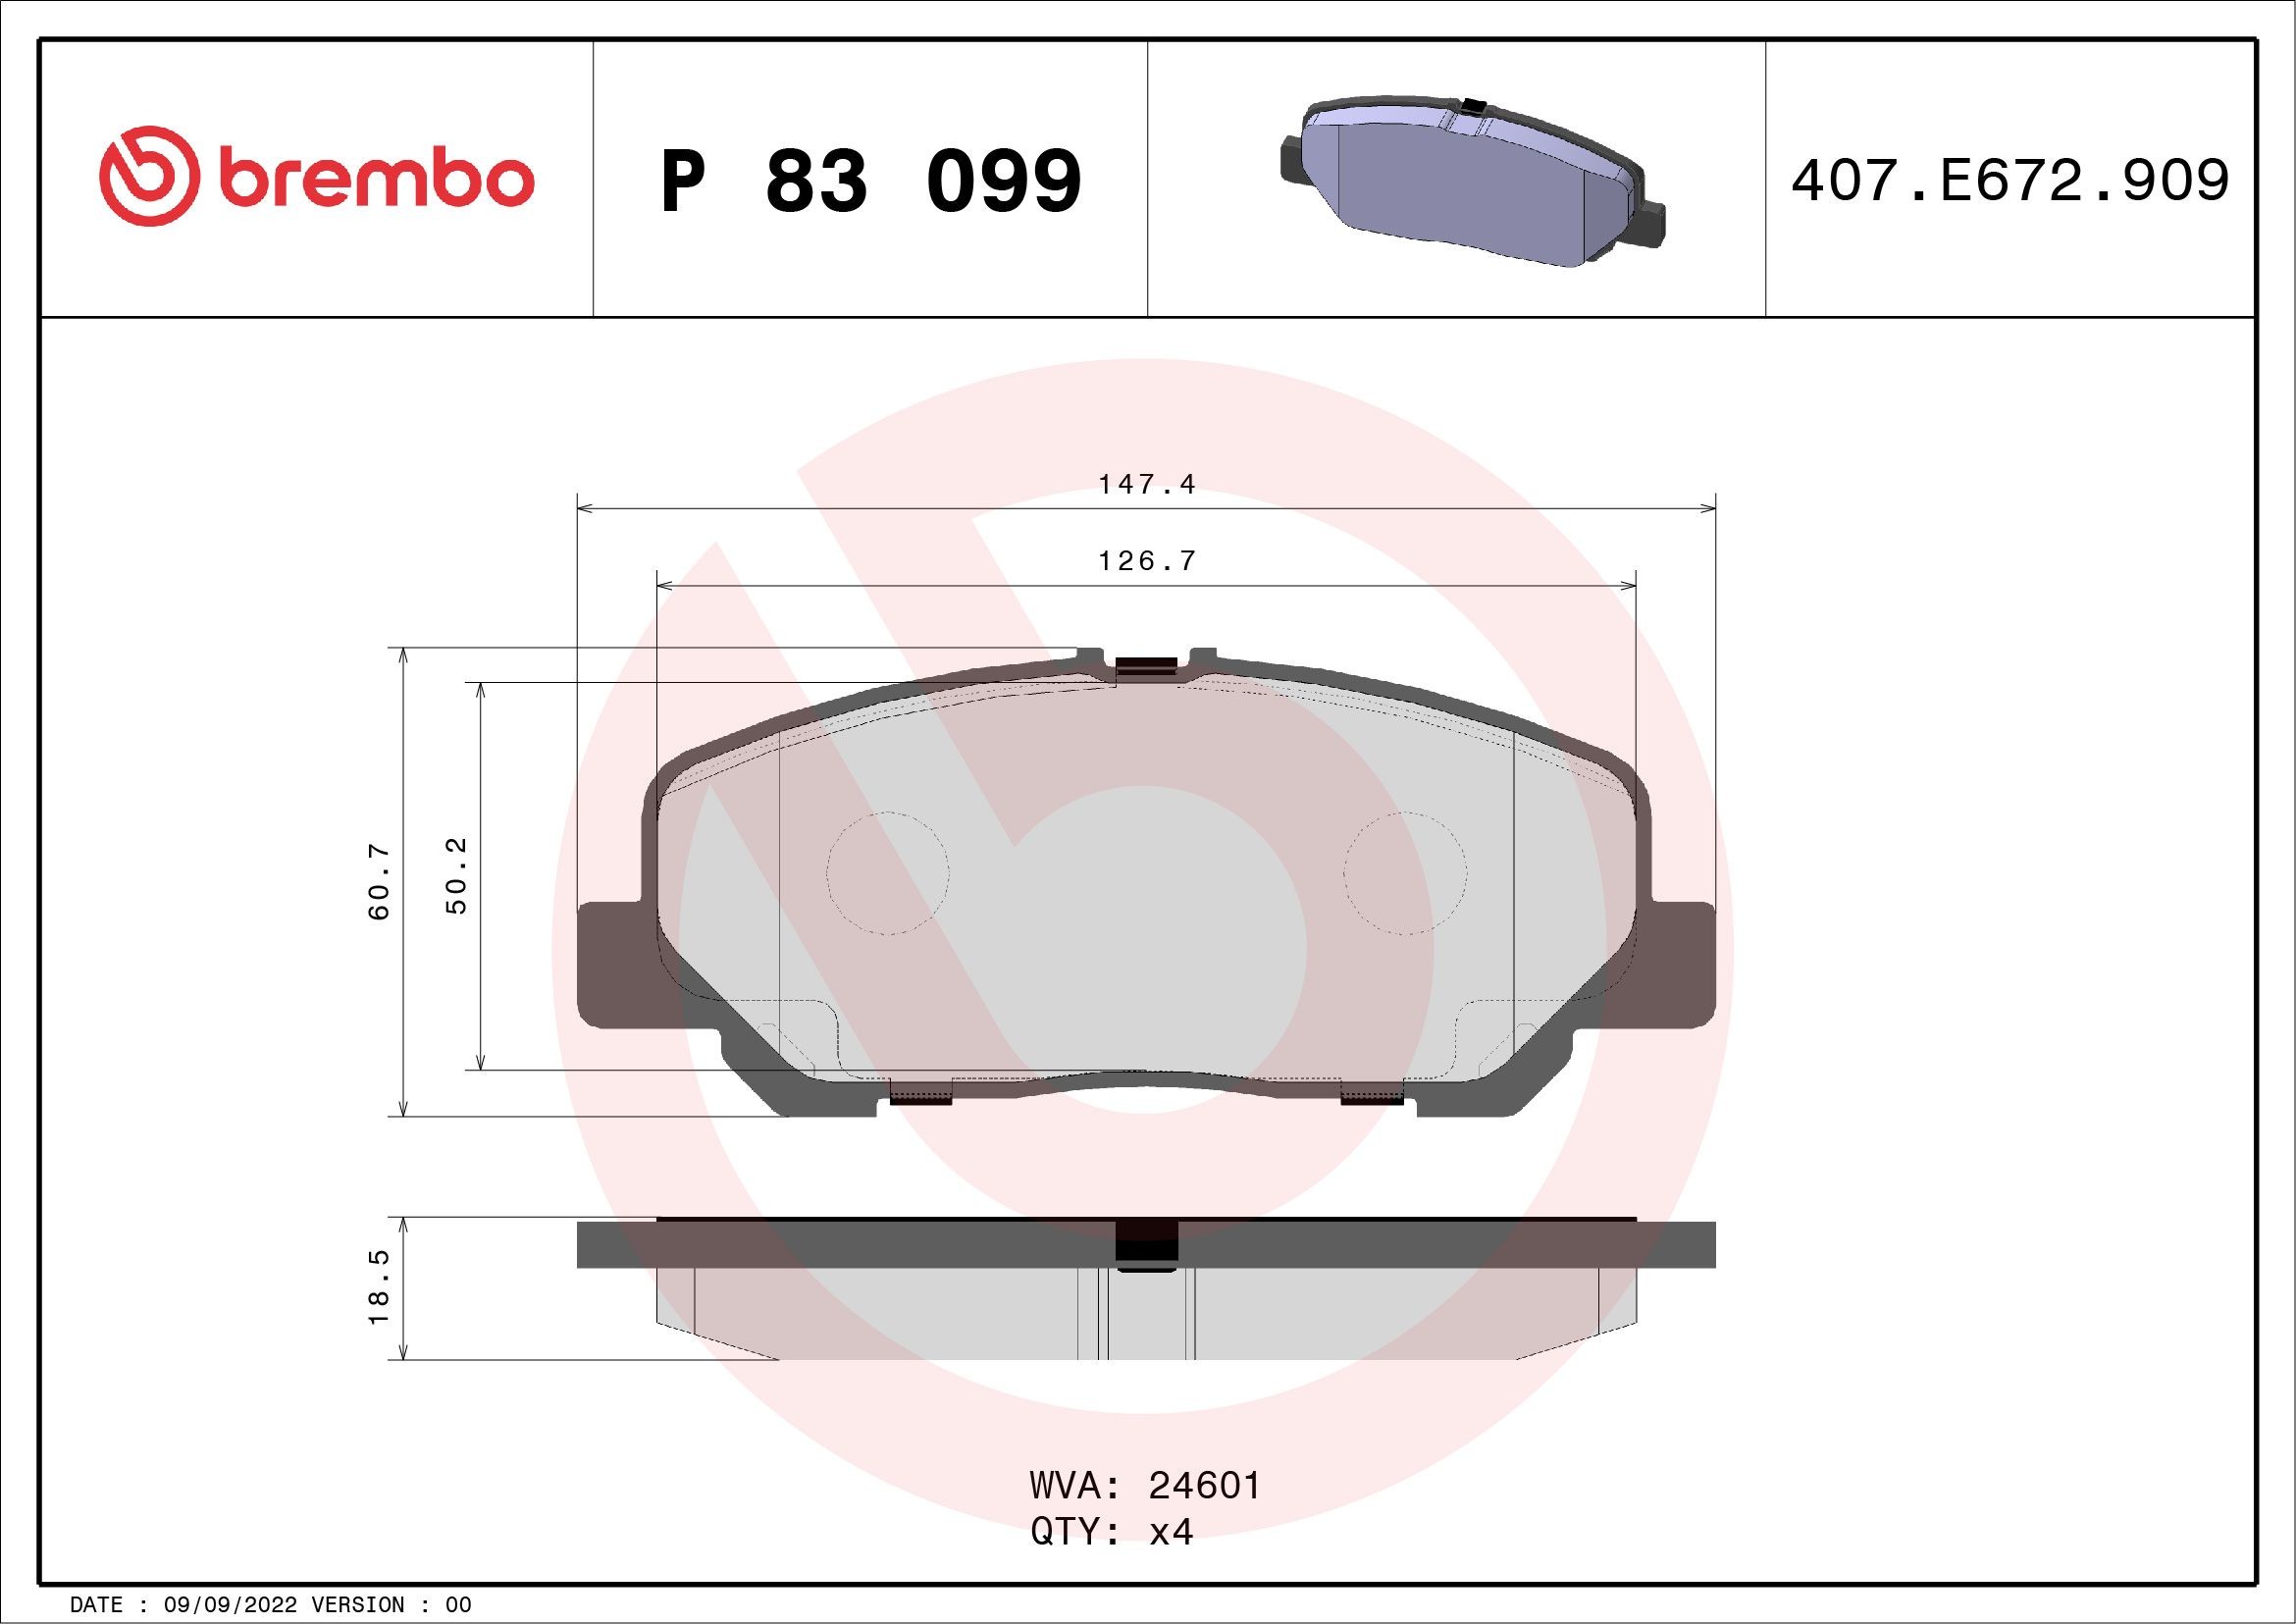 BREMBO P 83 099 Brake pad set prepared for wear indicator, without accessories